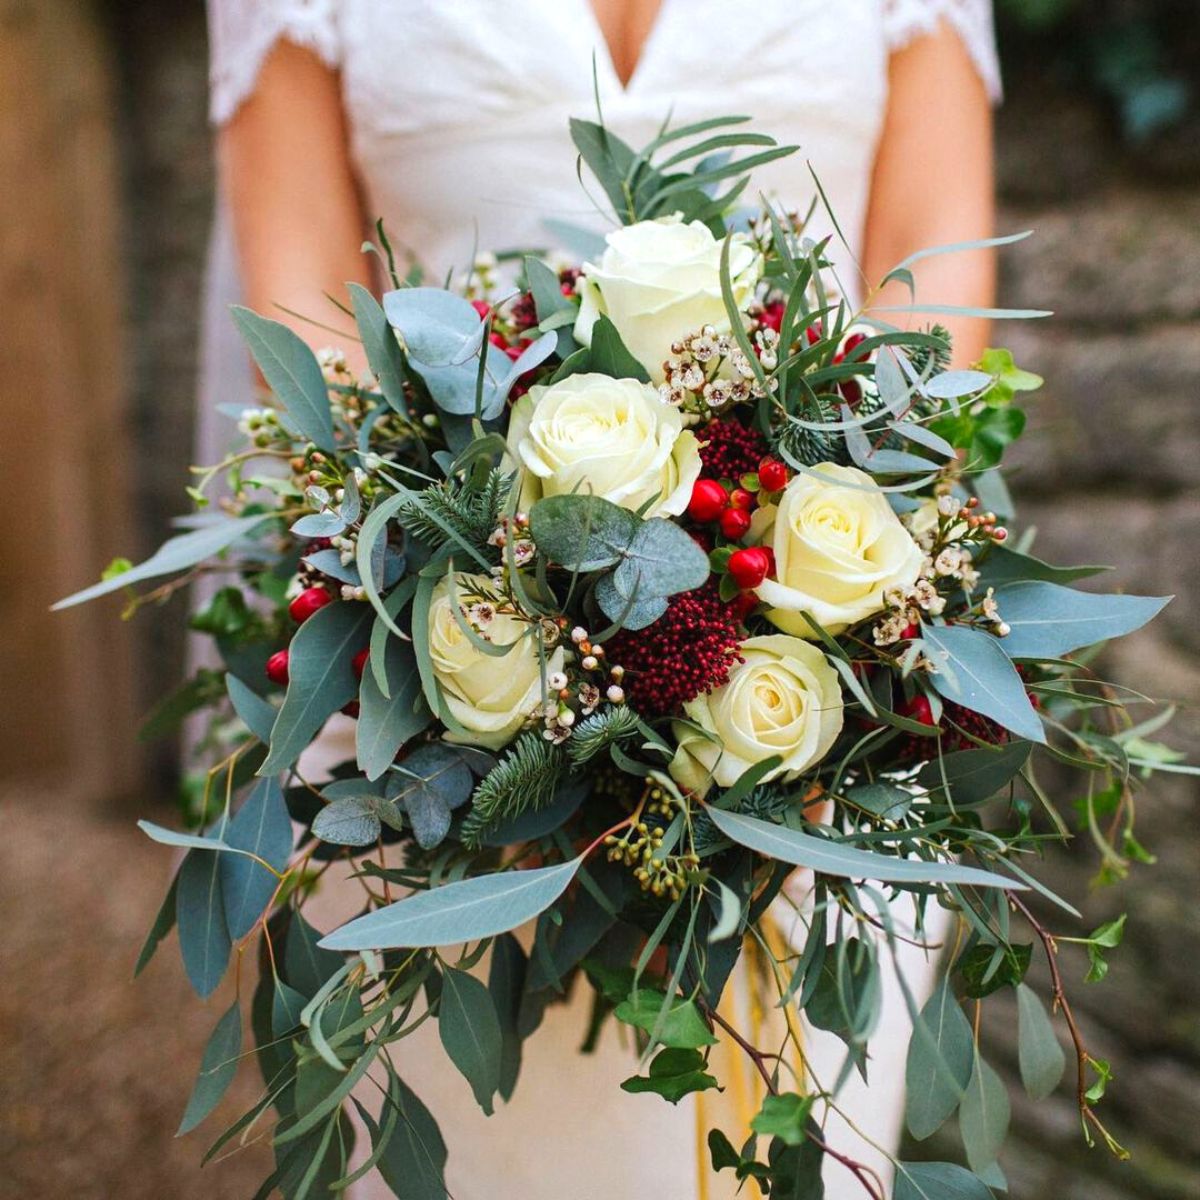 Classic combination of whites red and greens for wedding bouquet